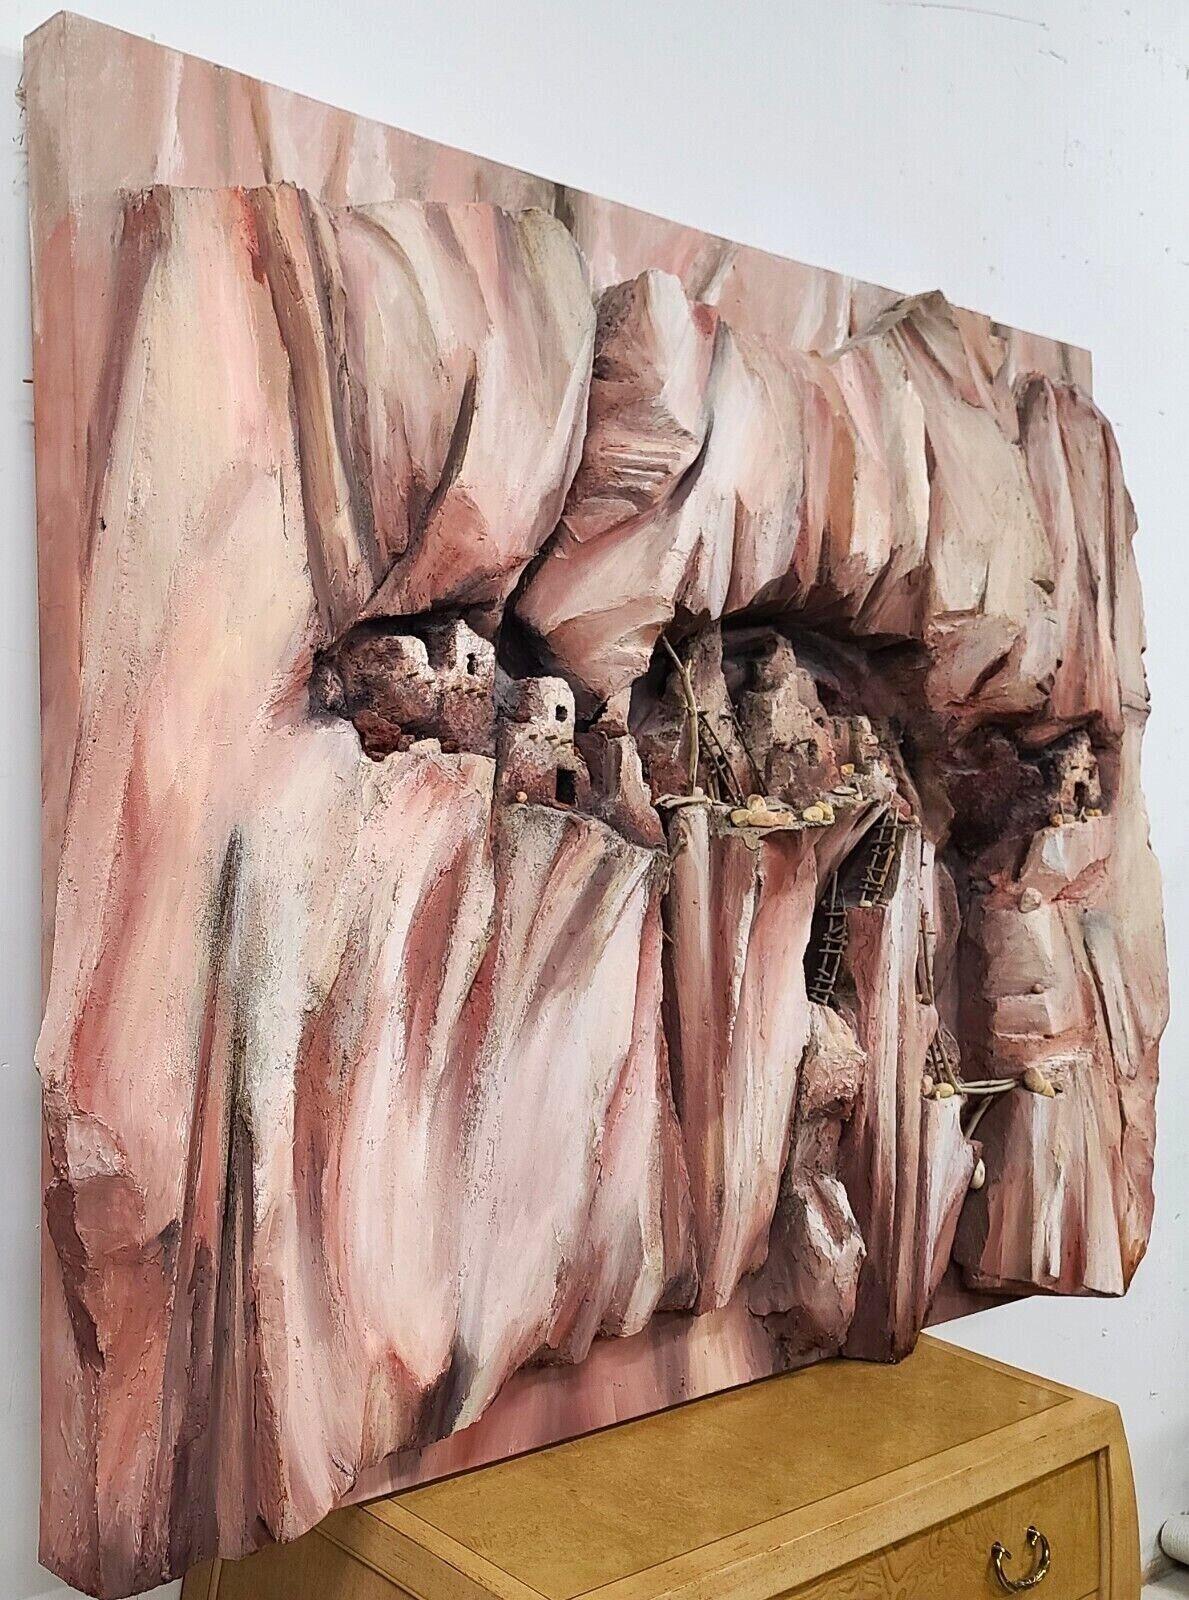 For FULL item description be sure to click on CONTINUE READING at the bottom of this listing.

7 Foot monumental Pueblo cliff dwelling 3 dimensional wall art sculpture 
Attributed to Artist Don Moore
Mounted on a wood frame and easily